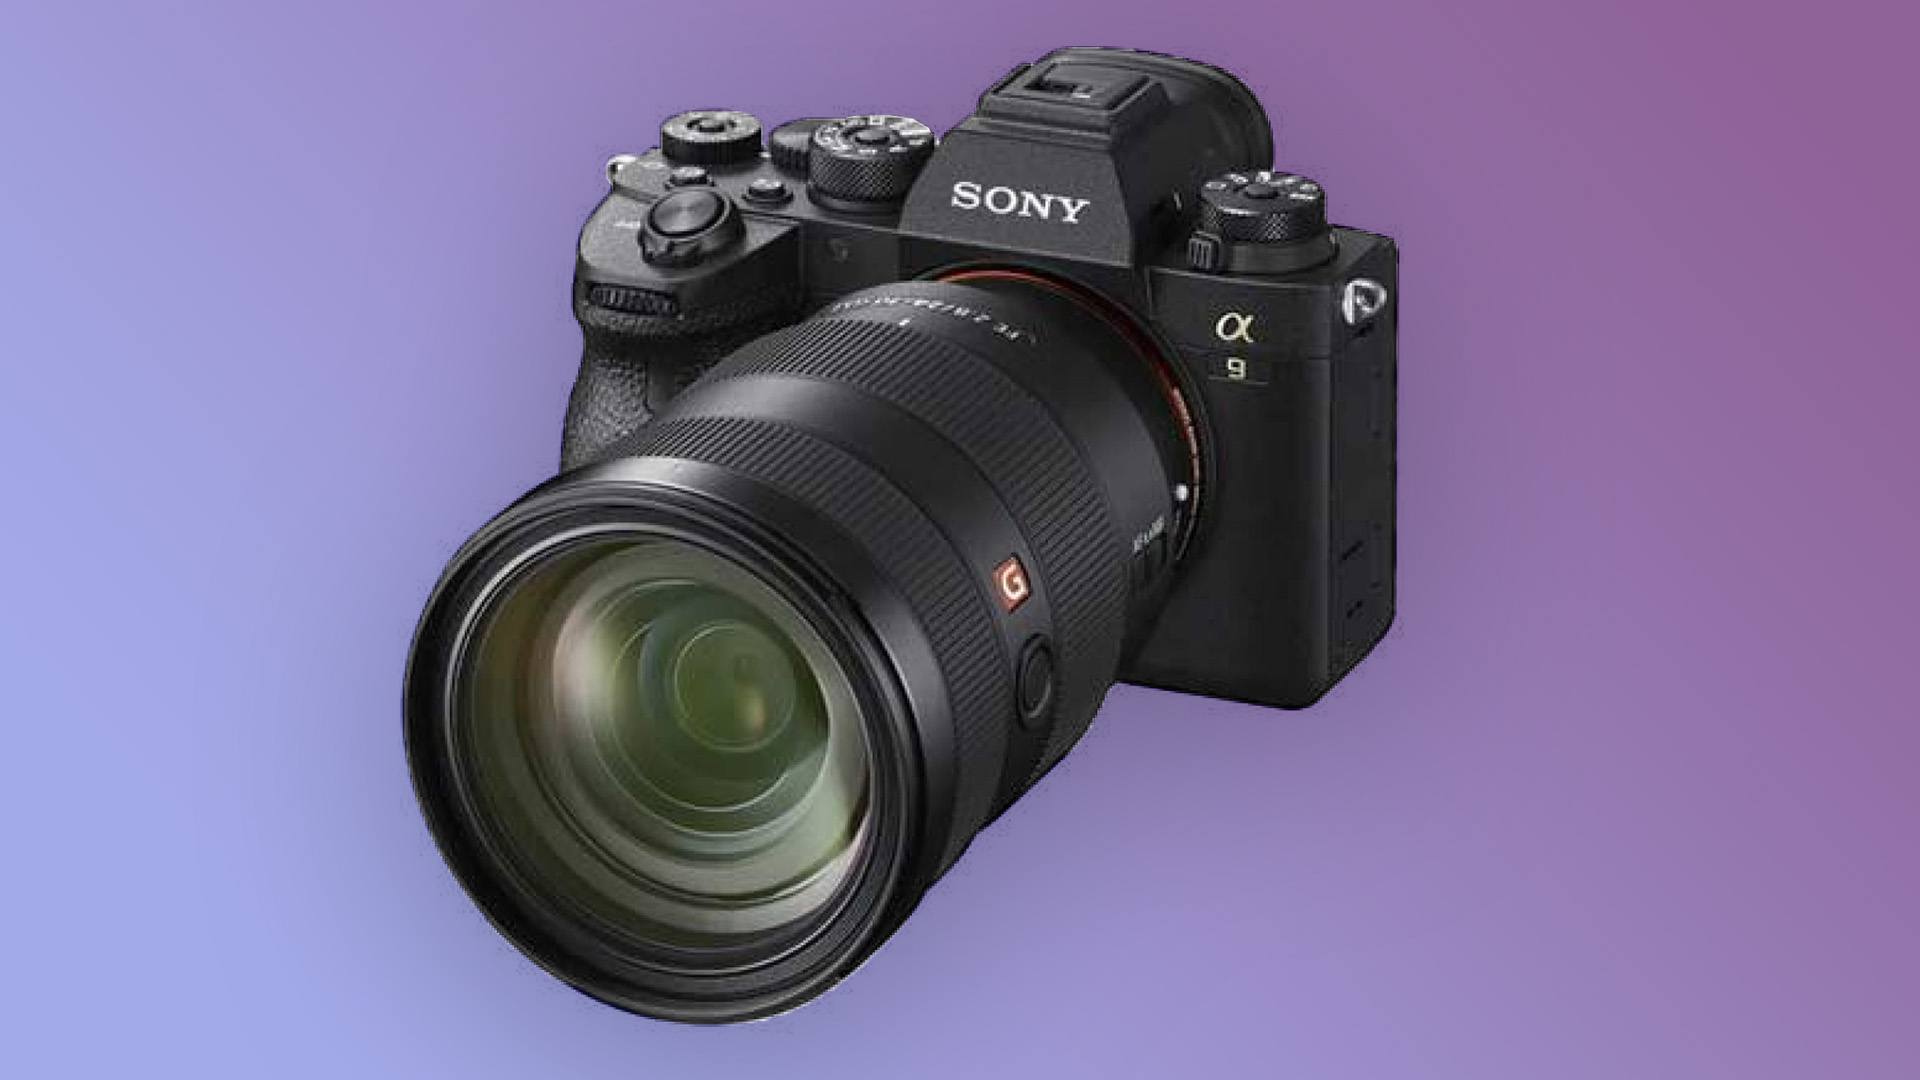 The Sony A9 II camera on a blue and purple background